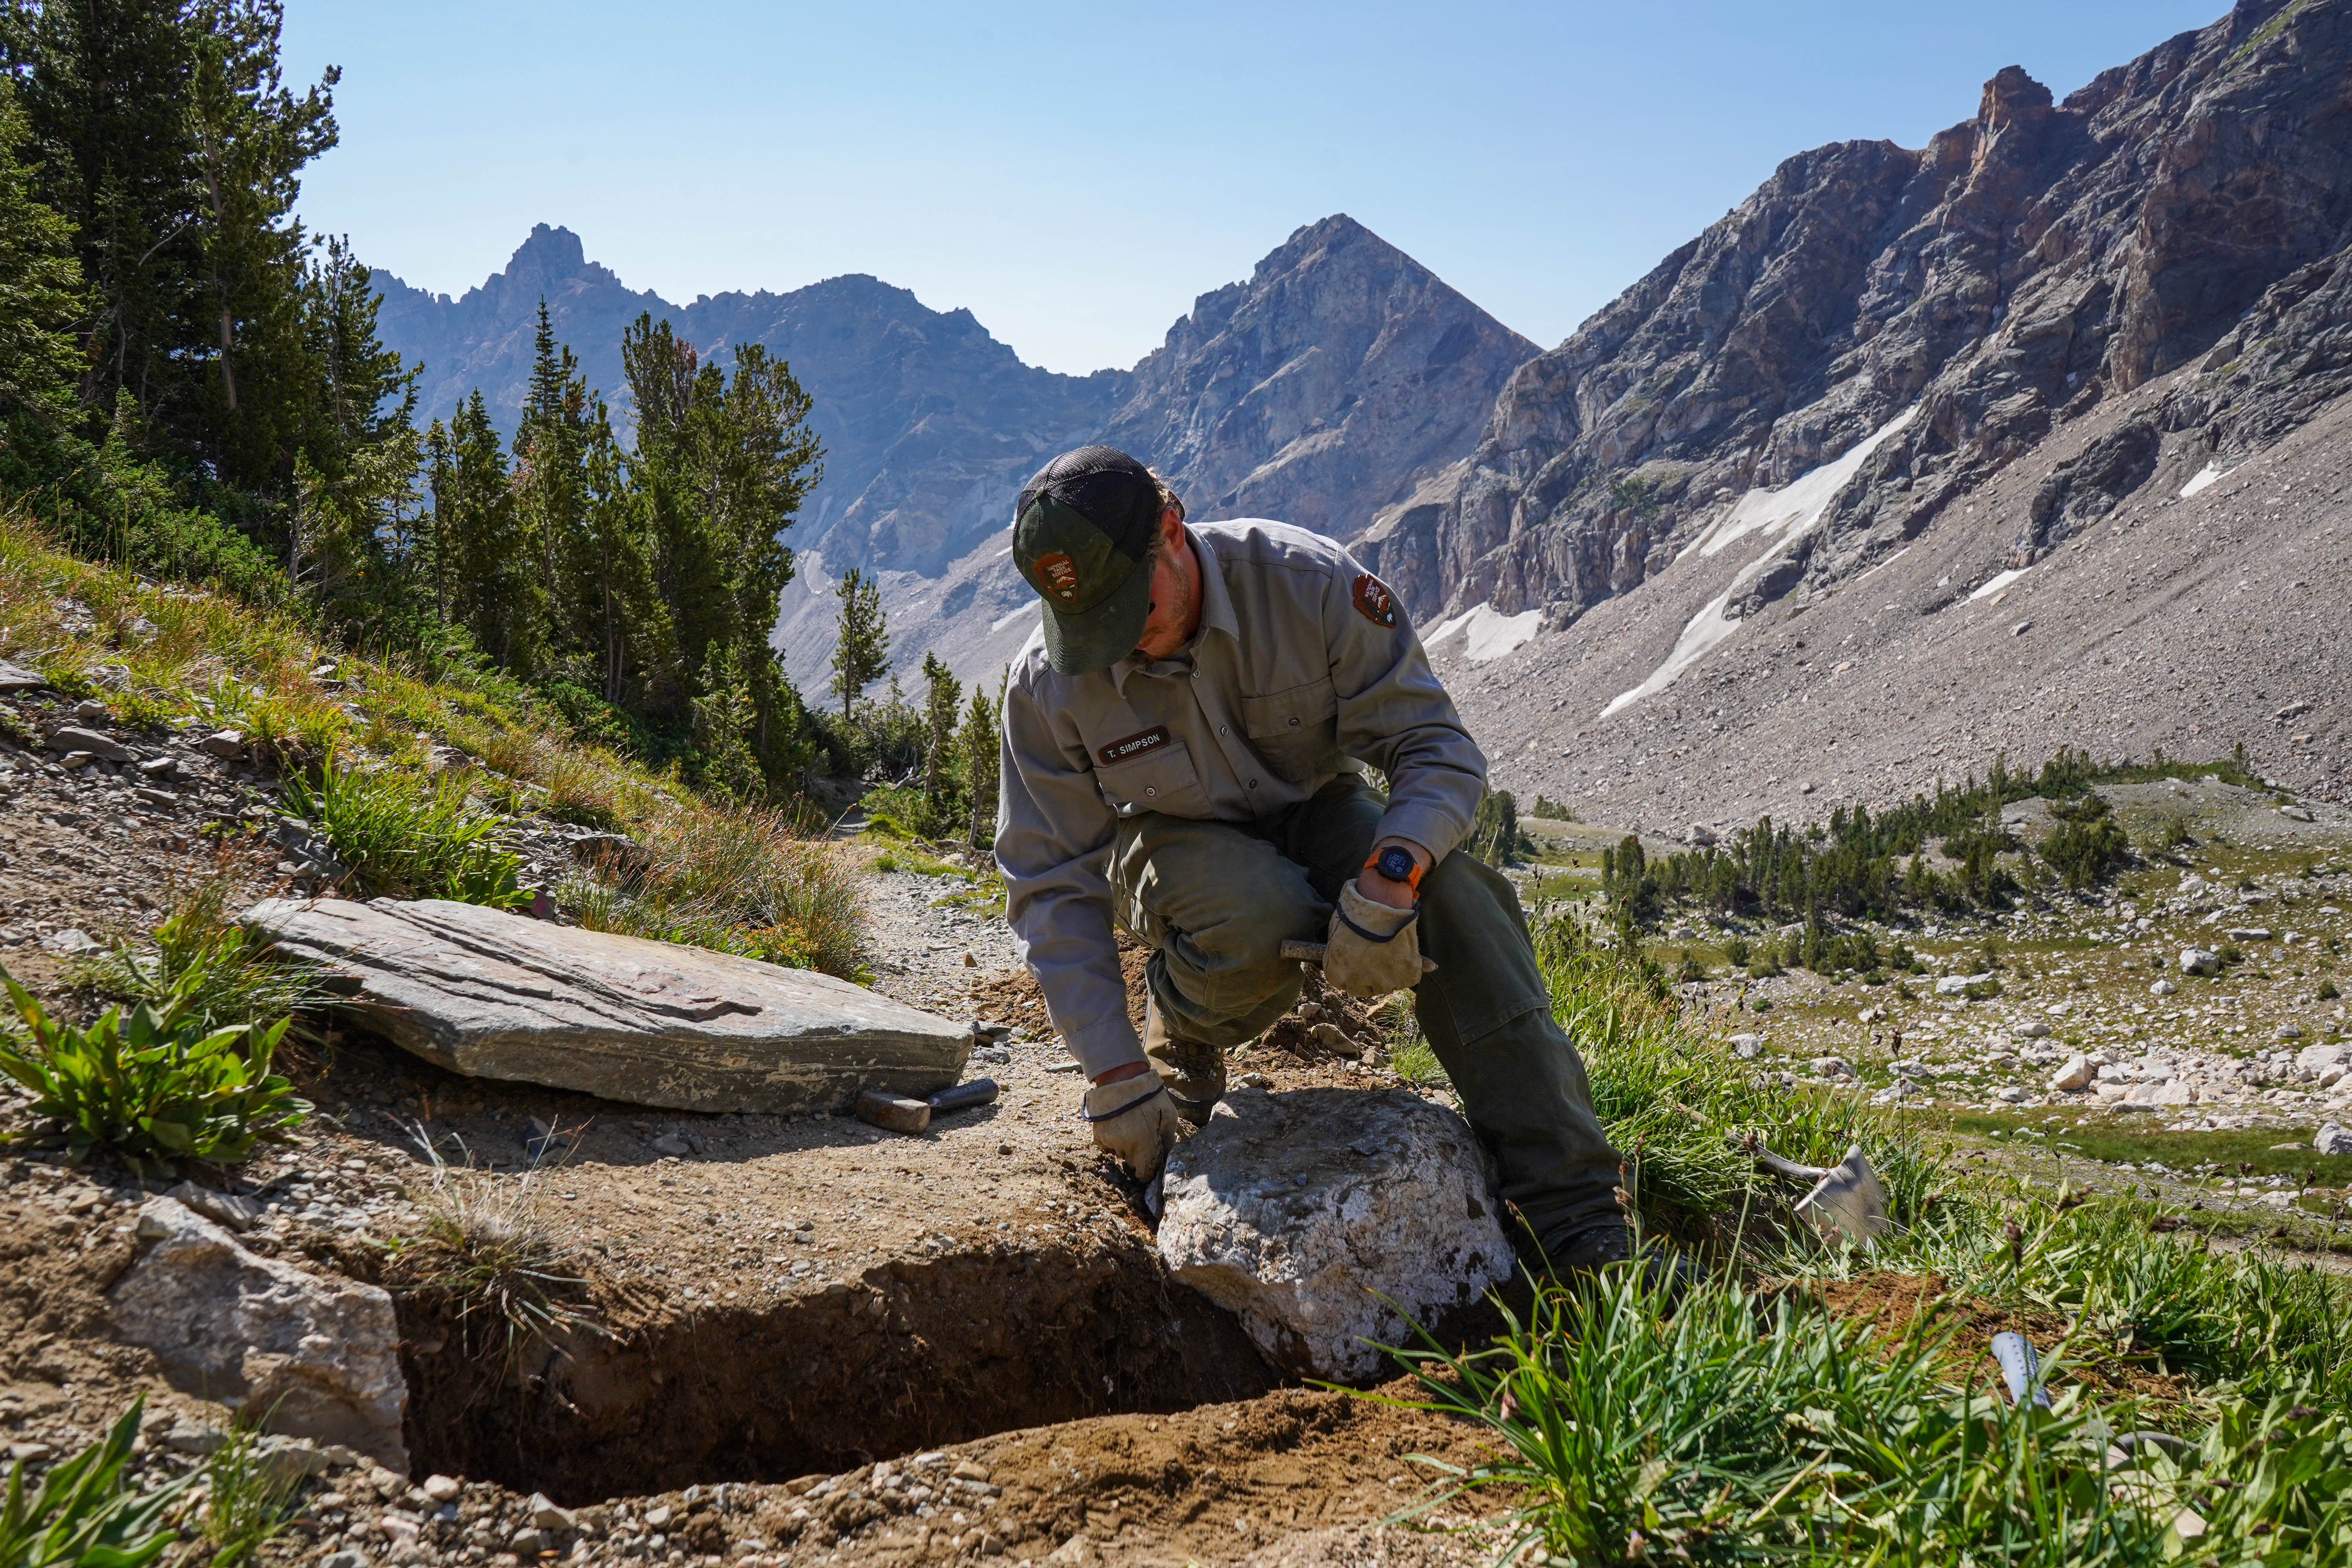 a park employee works on a trail in the mountains